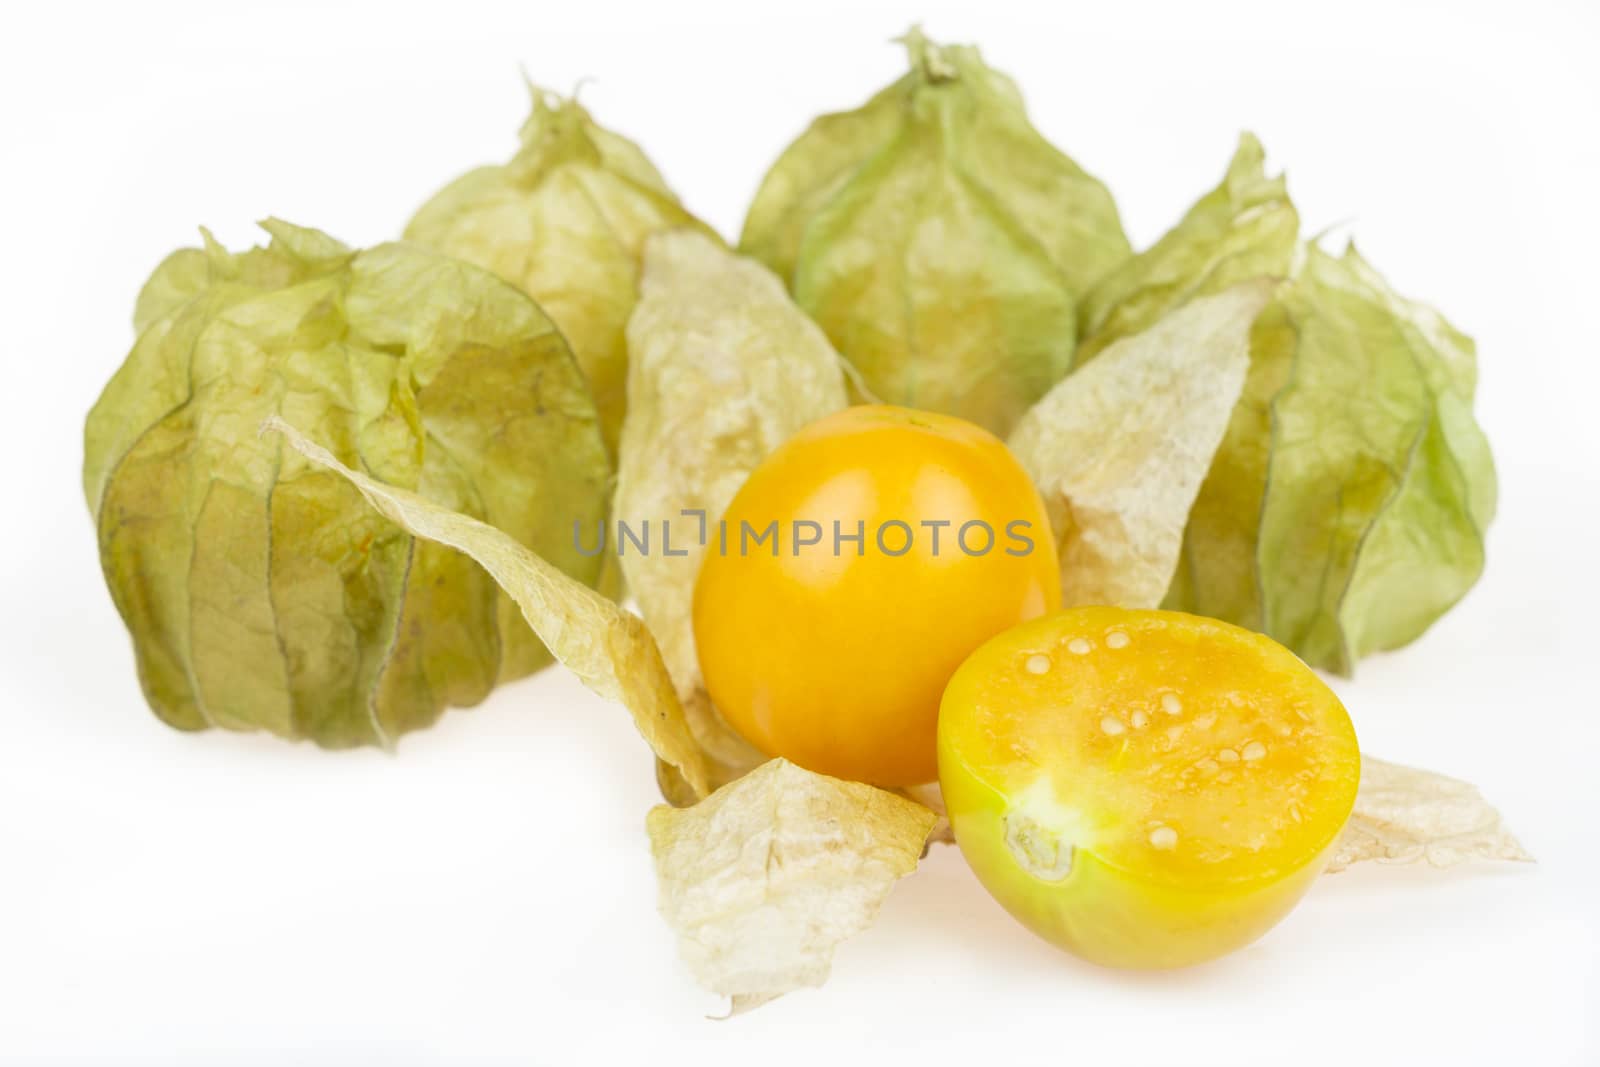 Cape gooseberry, physalis on white background.